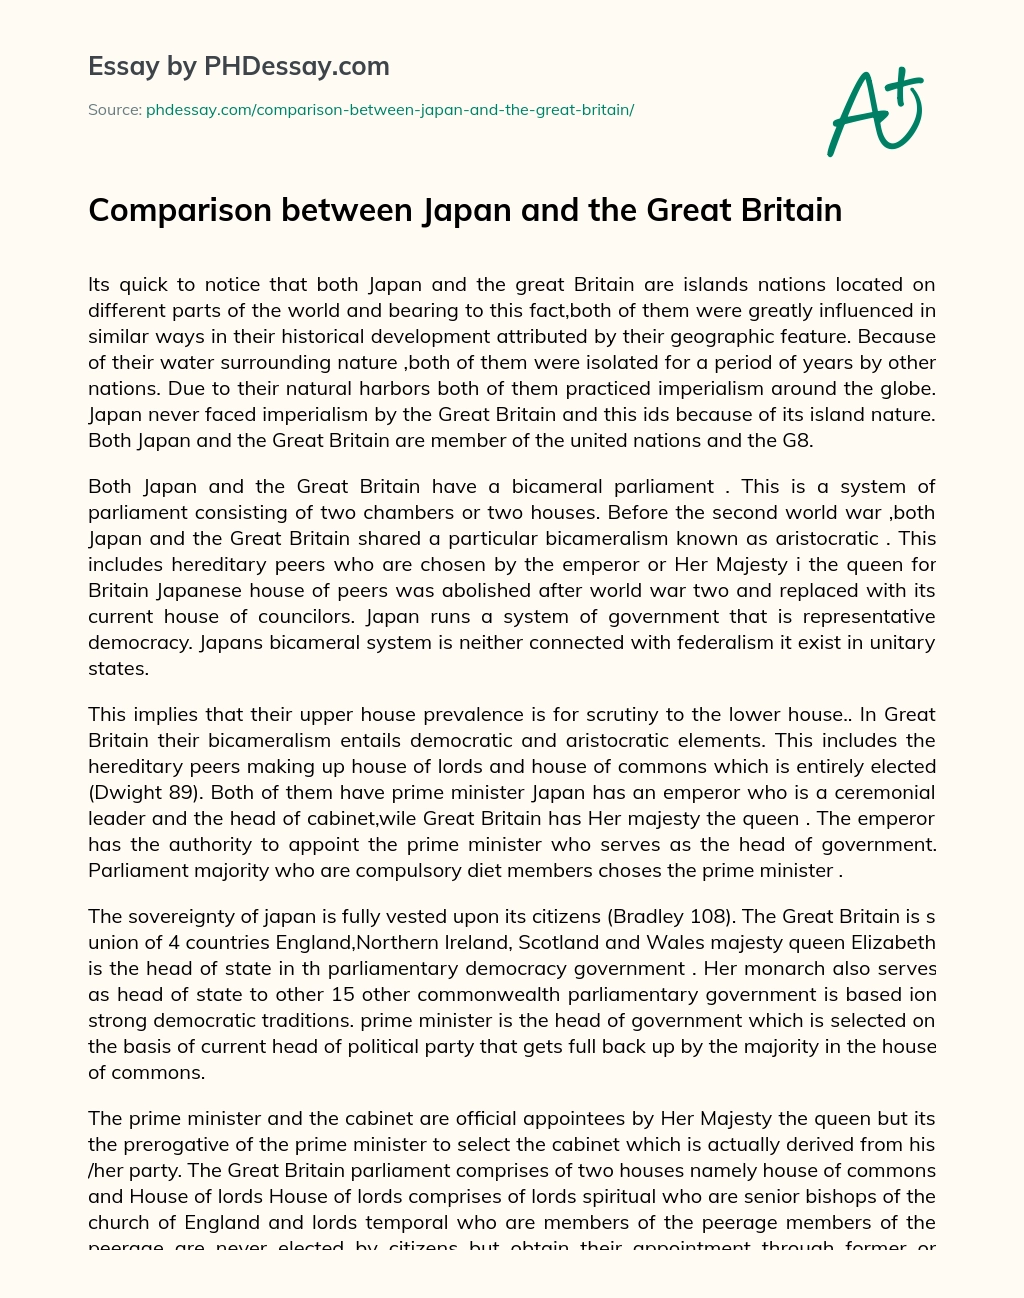 Comparison between Japan and the Great Britain essay